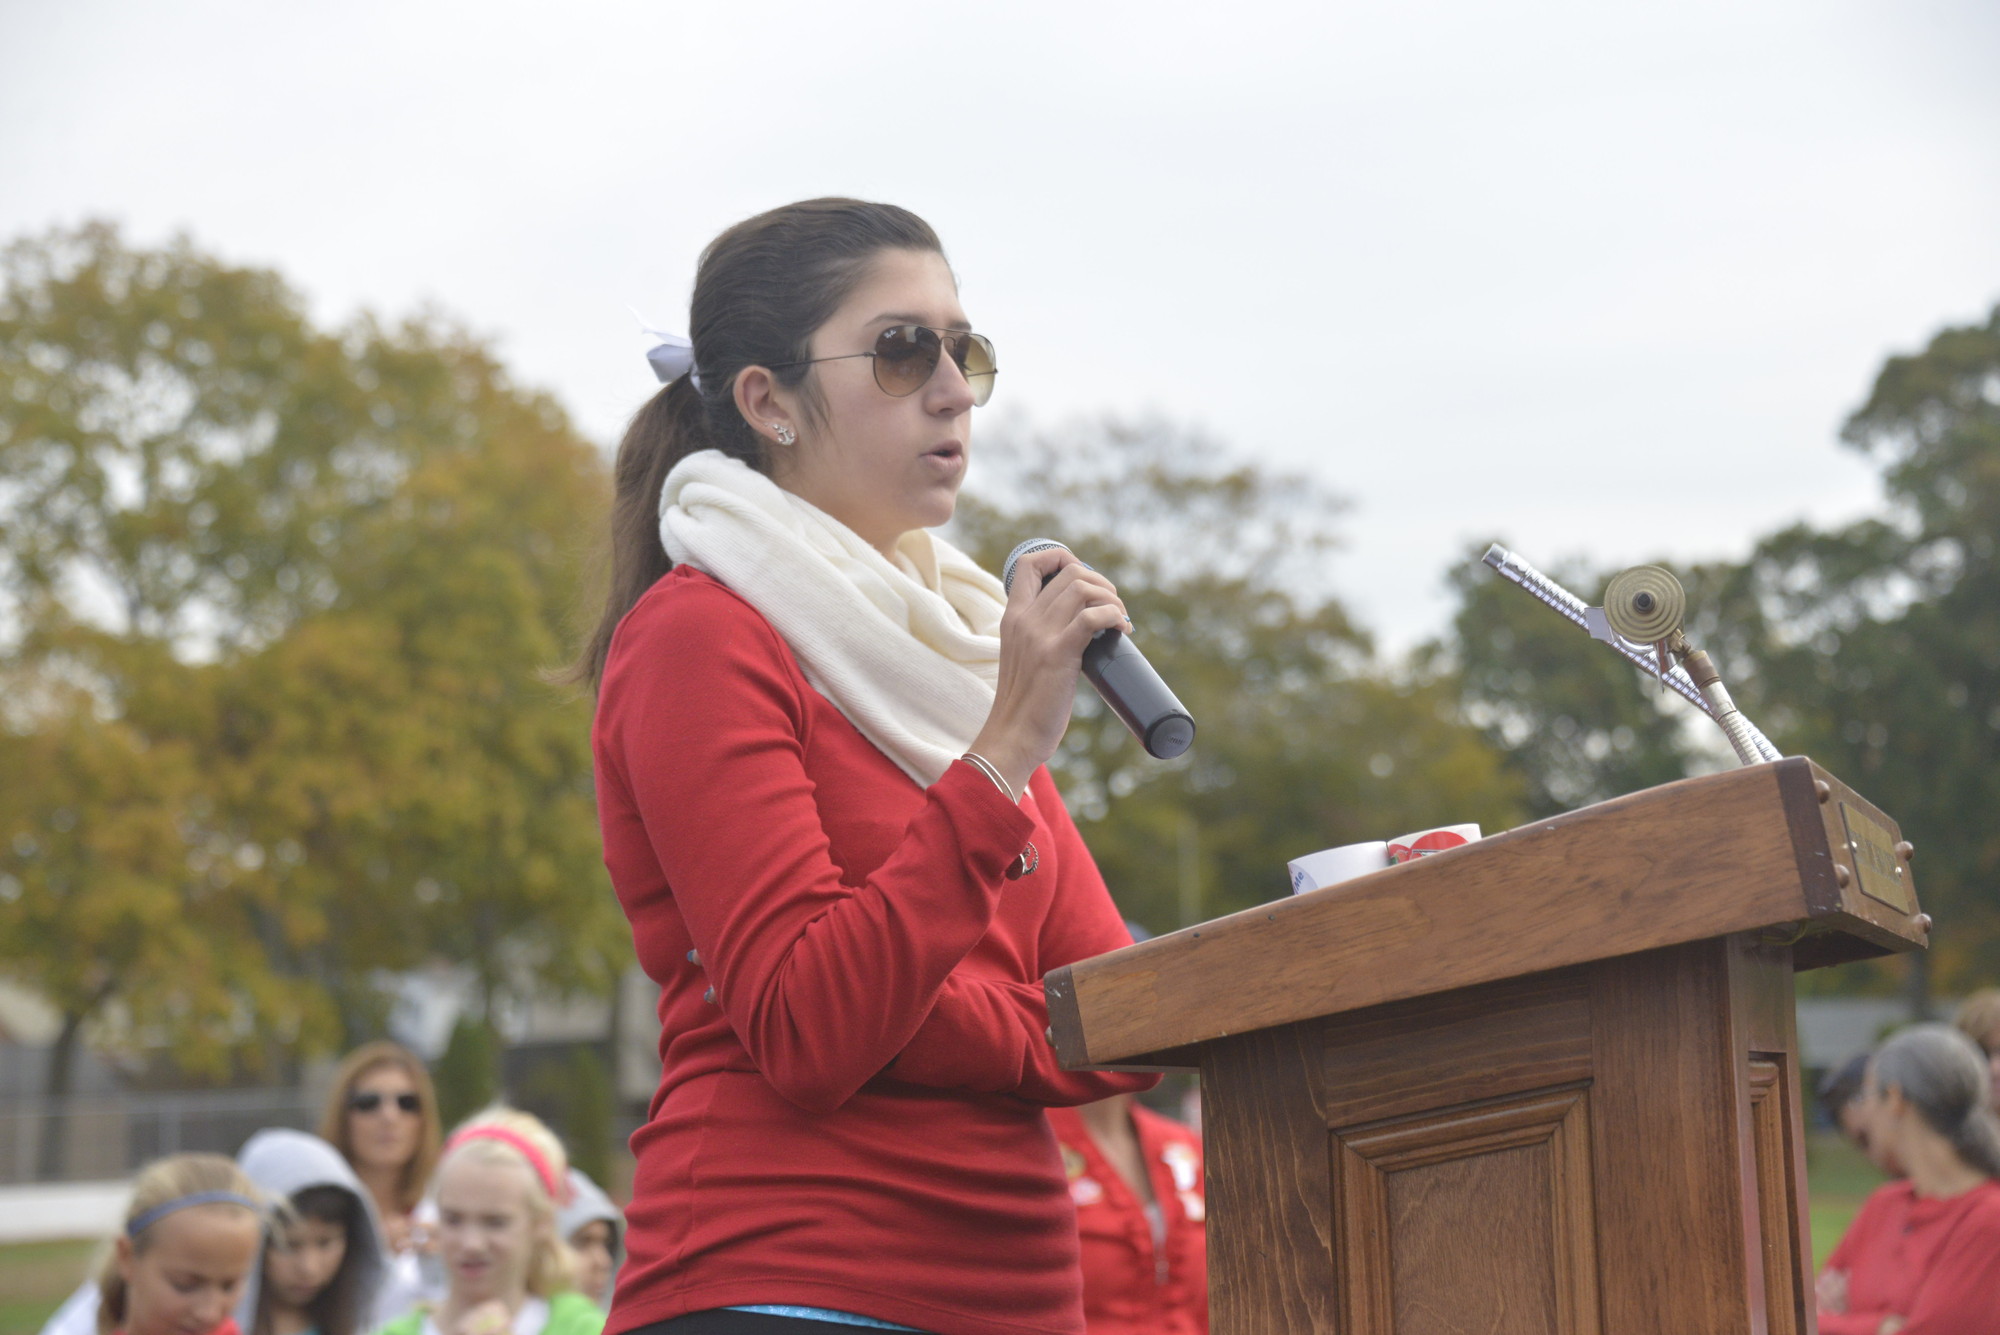 Jennifer Gentile, the president of the high school SADD chapter, spoke to those gathered before the walkathon began.